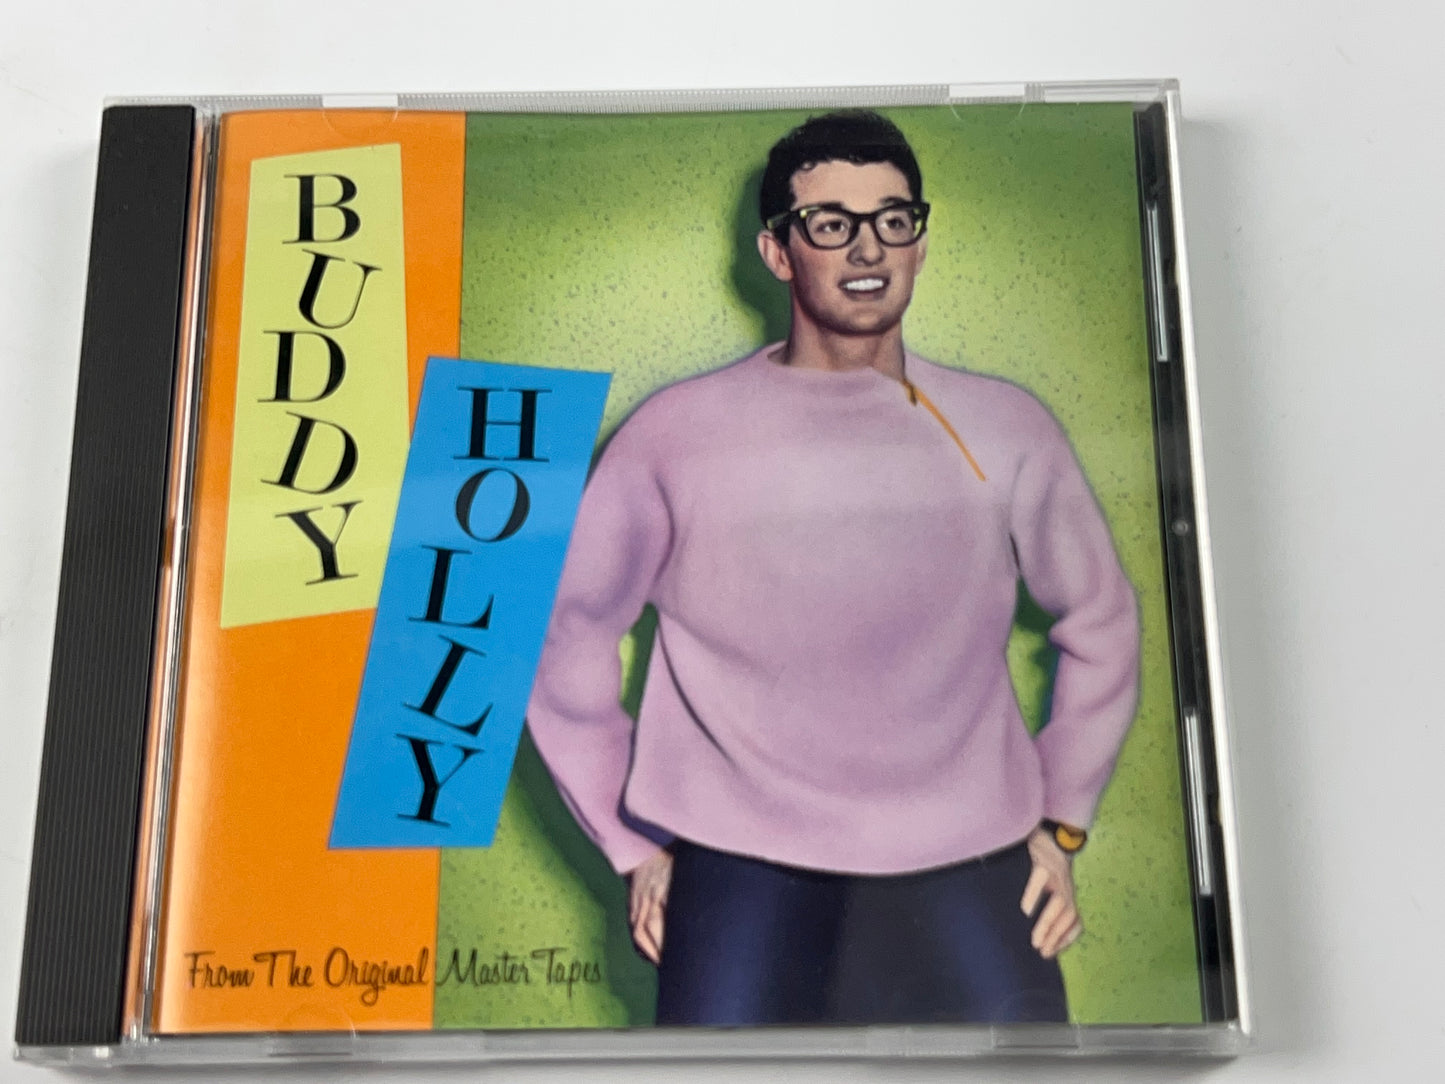 Buddy Holly. DIDX-203. From the Original Master Tapes. 1985, MCA